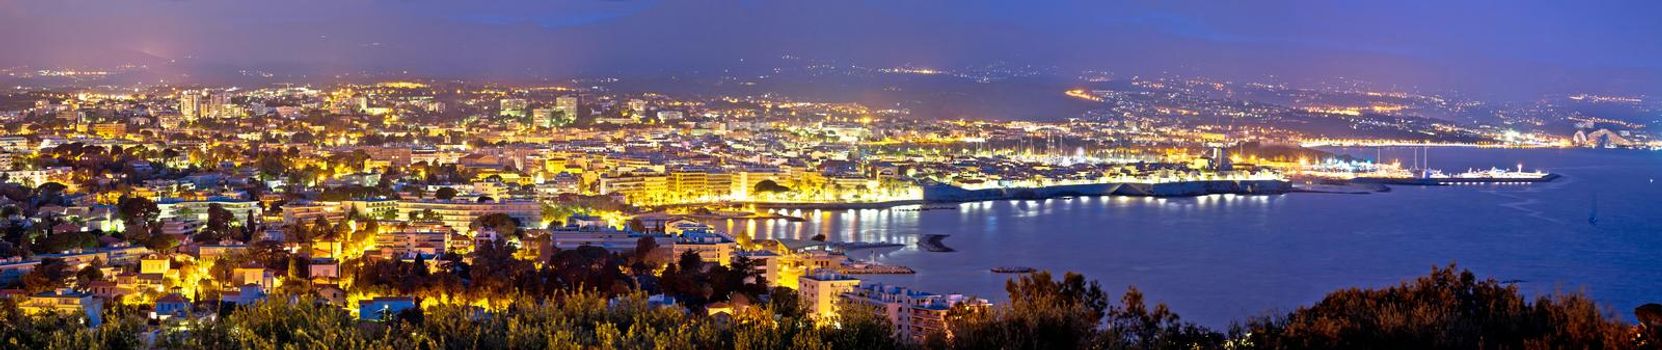 French riviera. Historic town of Antibes coastline panoramic evening view, famous destination in Cote d Azur, France
